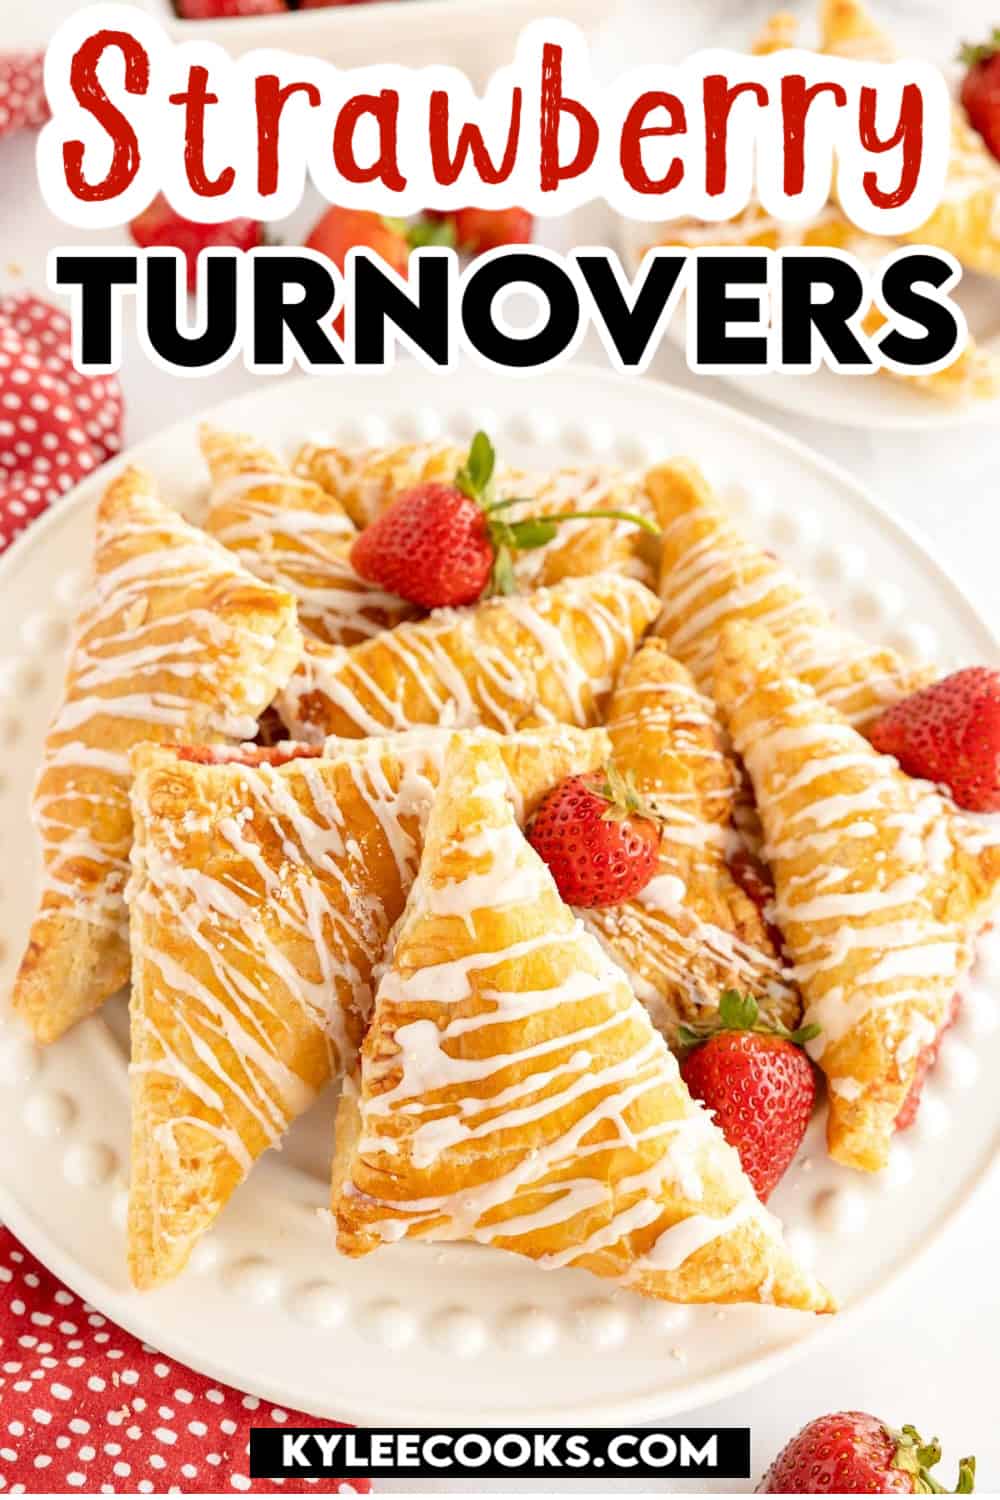 A plate of strawberry turnovers with icing on top, with recipe name overlaid in text.